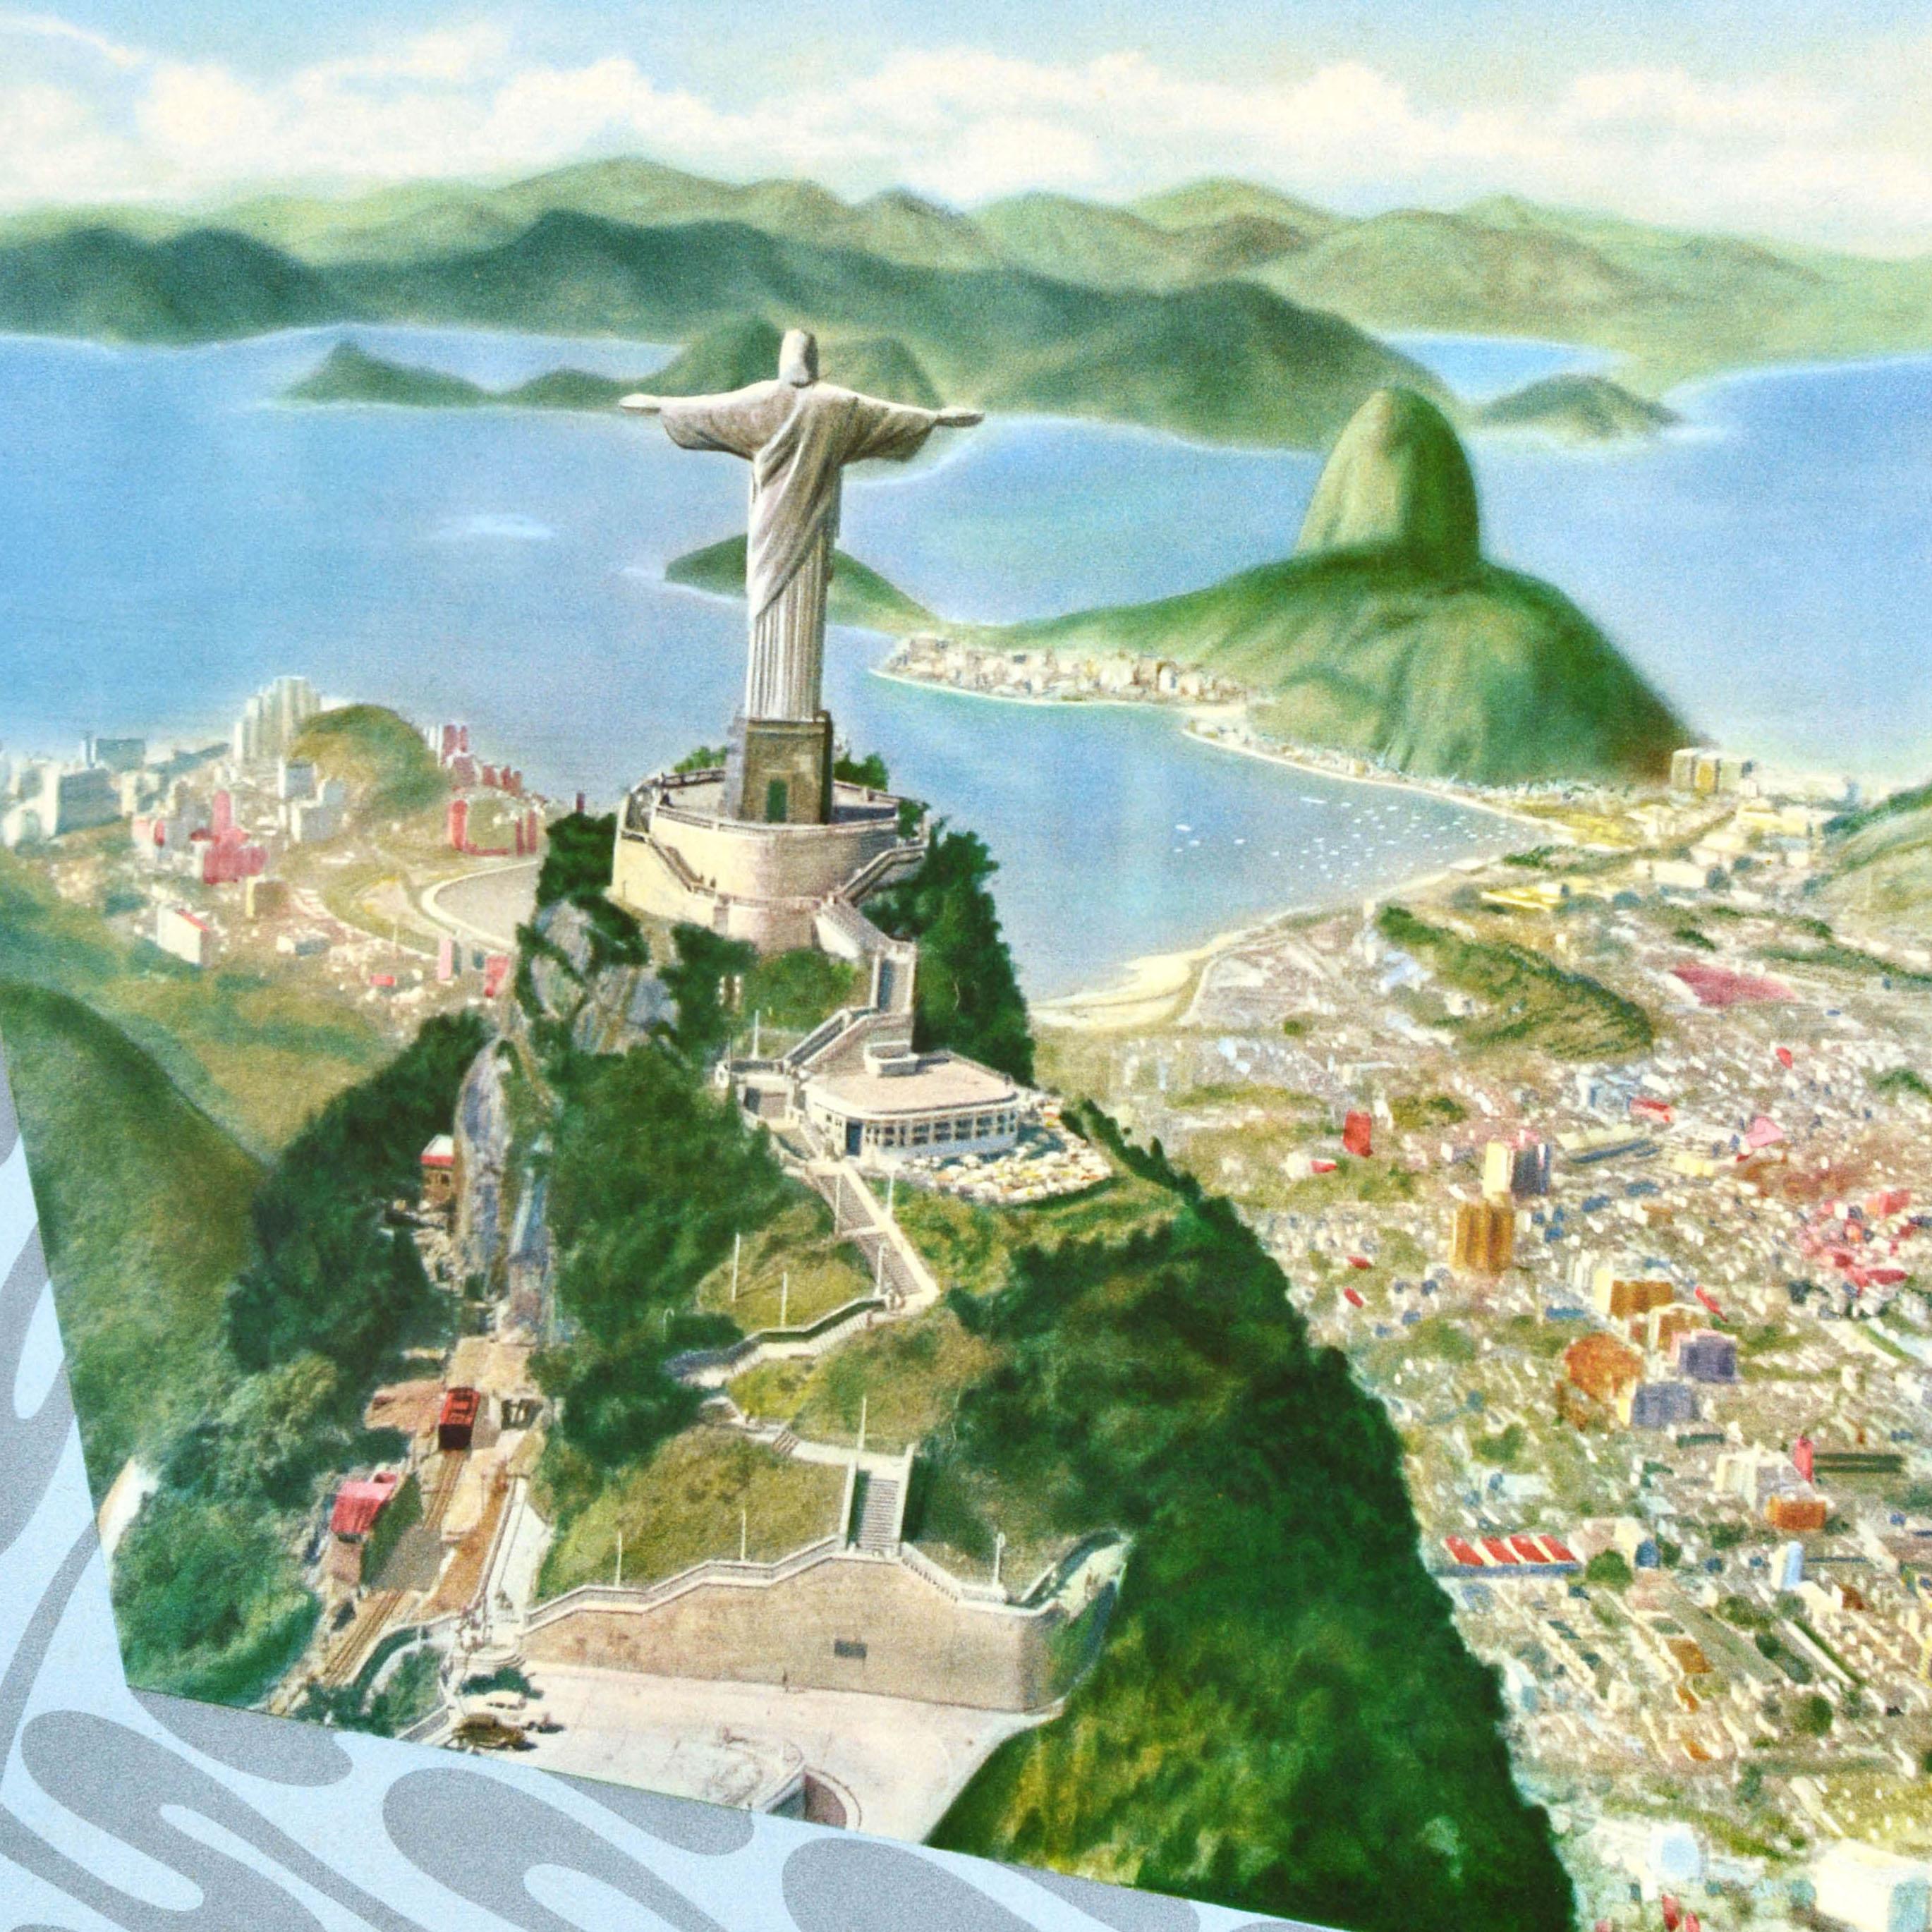 Original vintage travel poster for Rio de Janeiro in Brazil South America featuring the Christ the Redeemer statue on top of Mount Corcovado overlooking the city below with Sugarloaf Mountain and the sea leading to mist covered hills on the horizon,